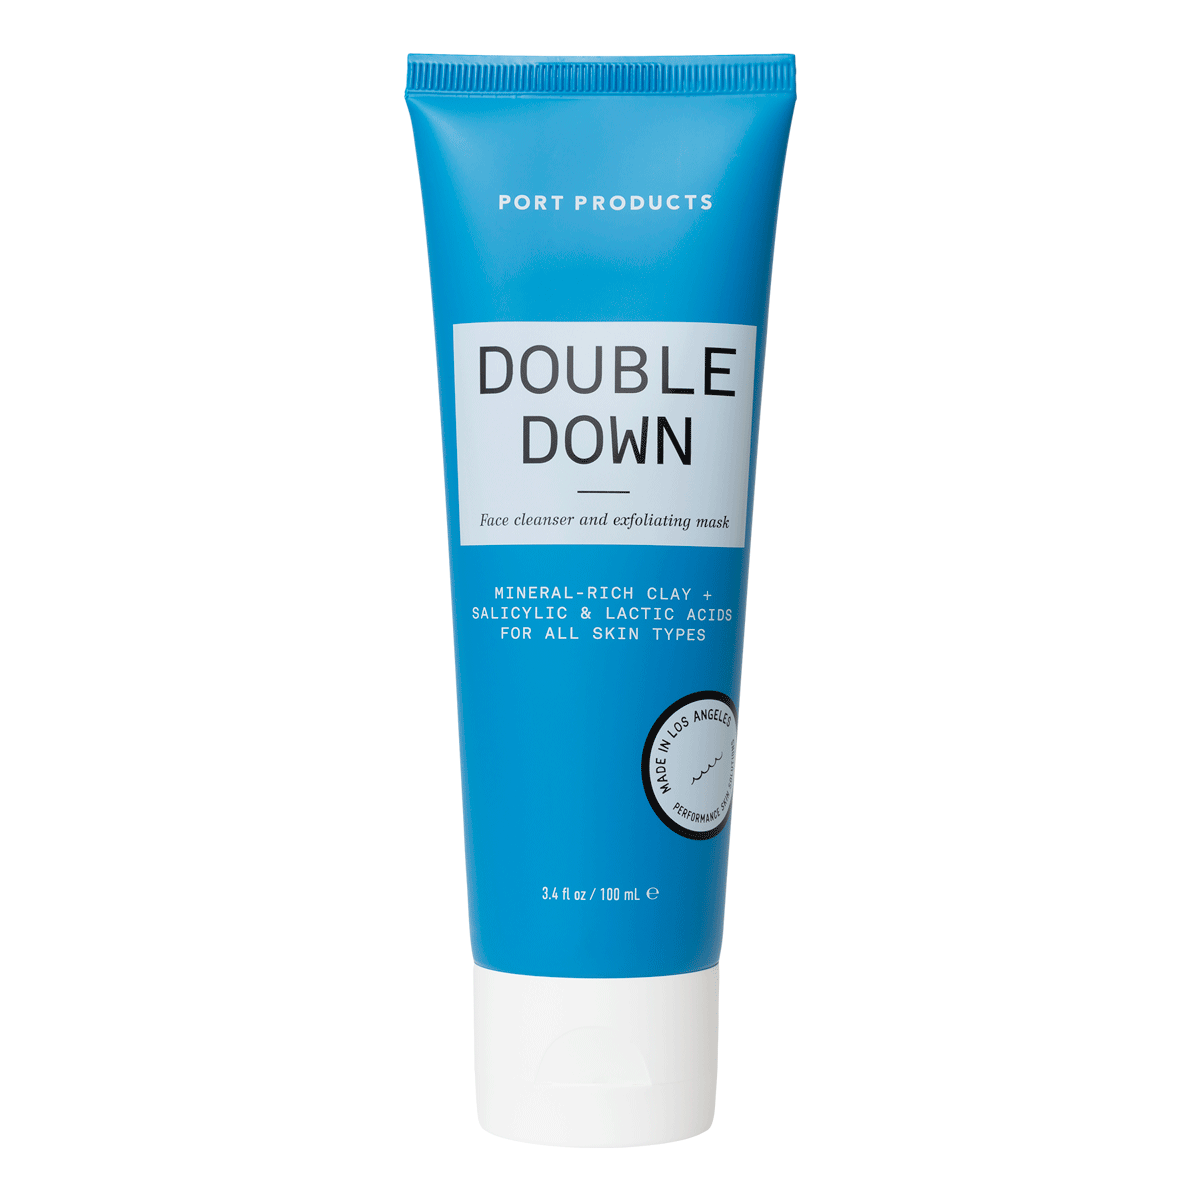 Double Down Face Cleanser and Exfoliating Mask blue tube on white background